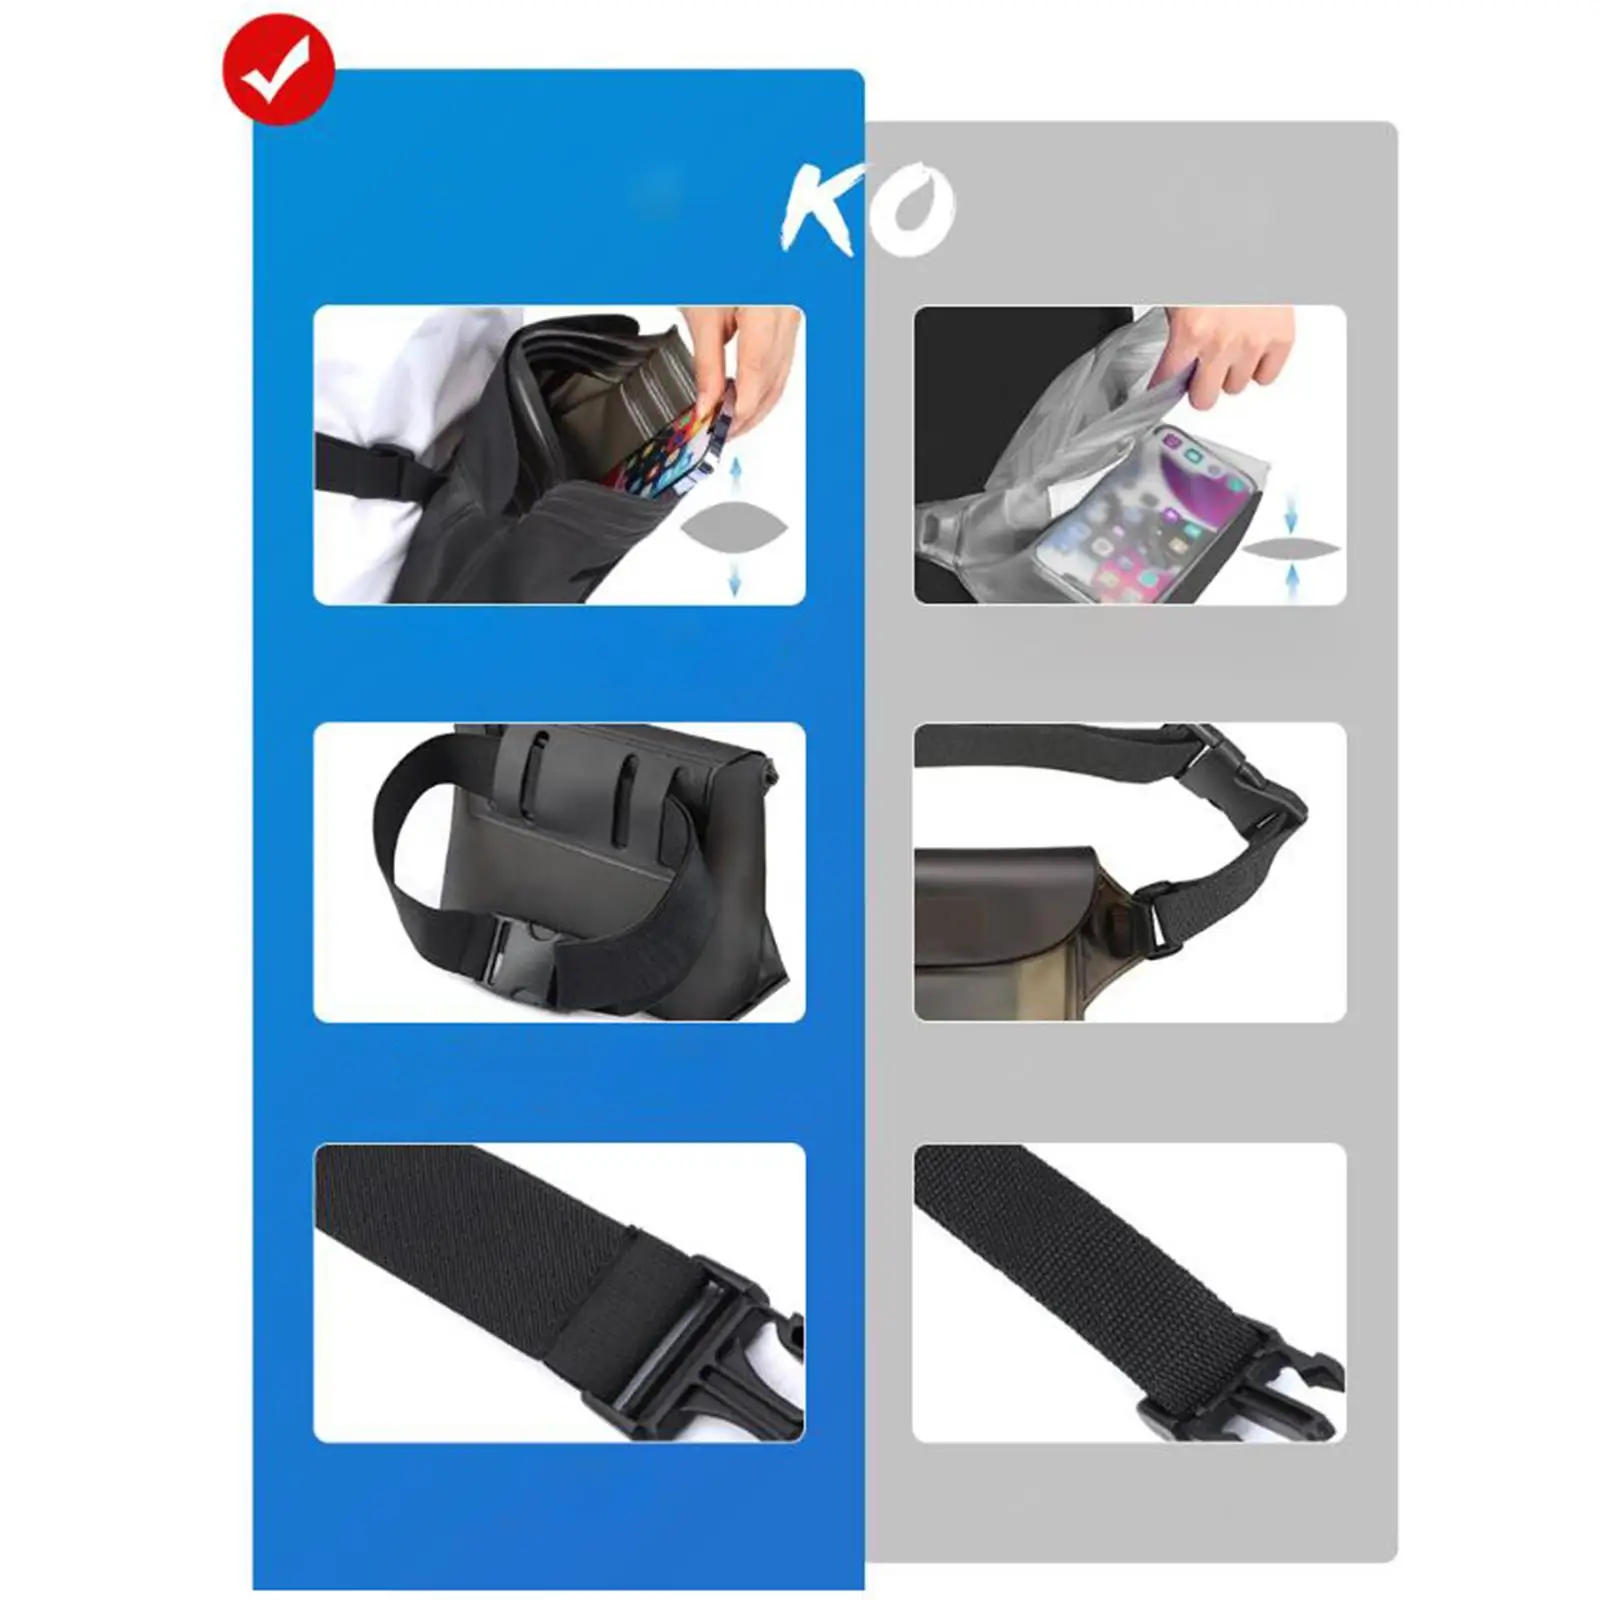 Waterproof Fanny Pack 20x16x8cm Screen Touchable Large Cross Body Waist Bag for Men Travel Outdoor Activities Water Parks